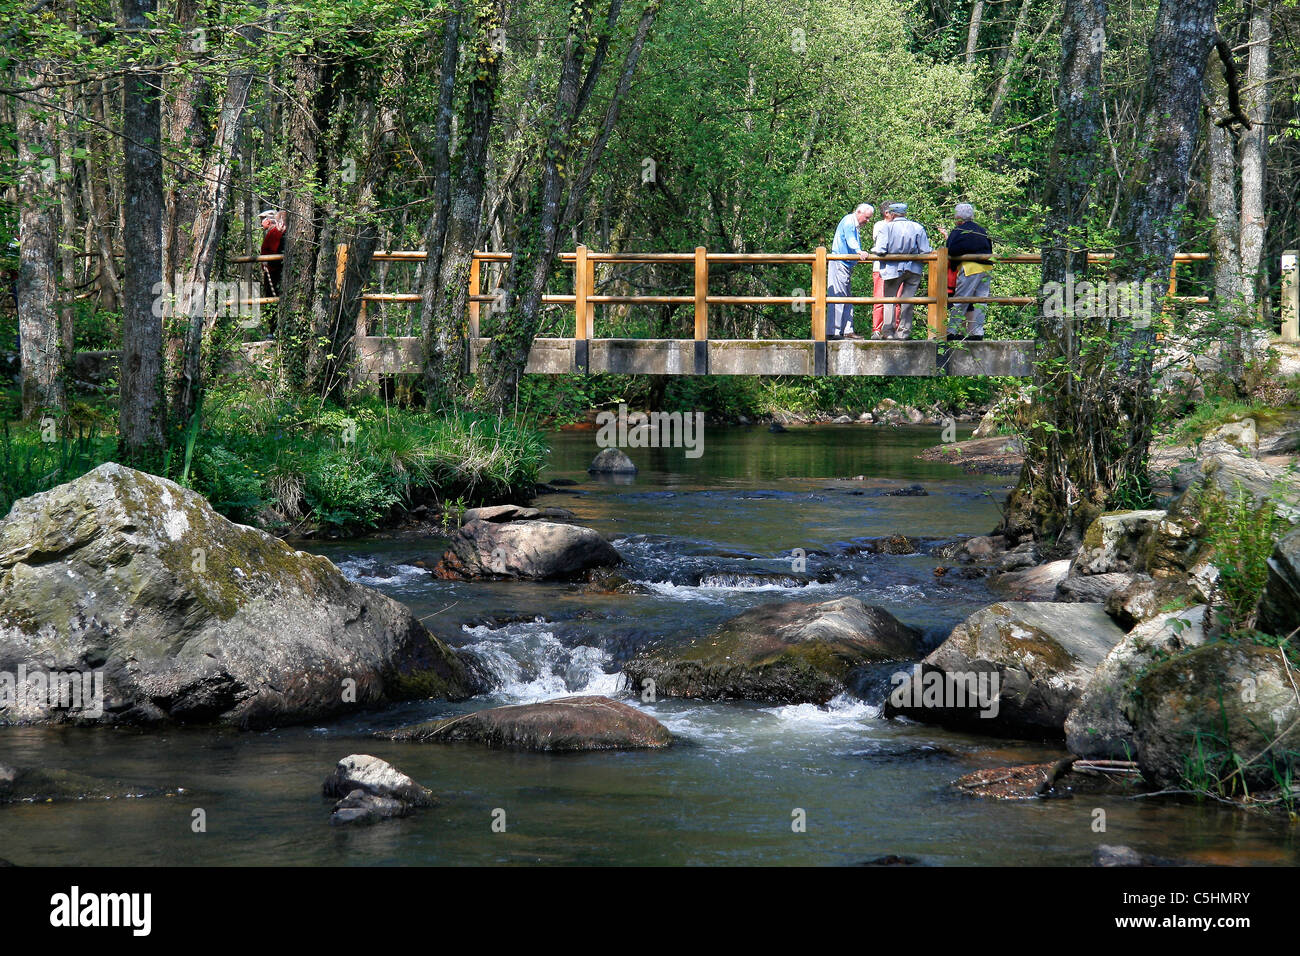 Seniors chat on a wooden bridge over a river at the 'Fosse Arthour' (French arthurian site and climbing site, Normandy). Stock Photo